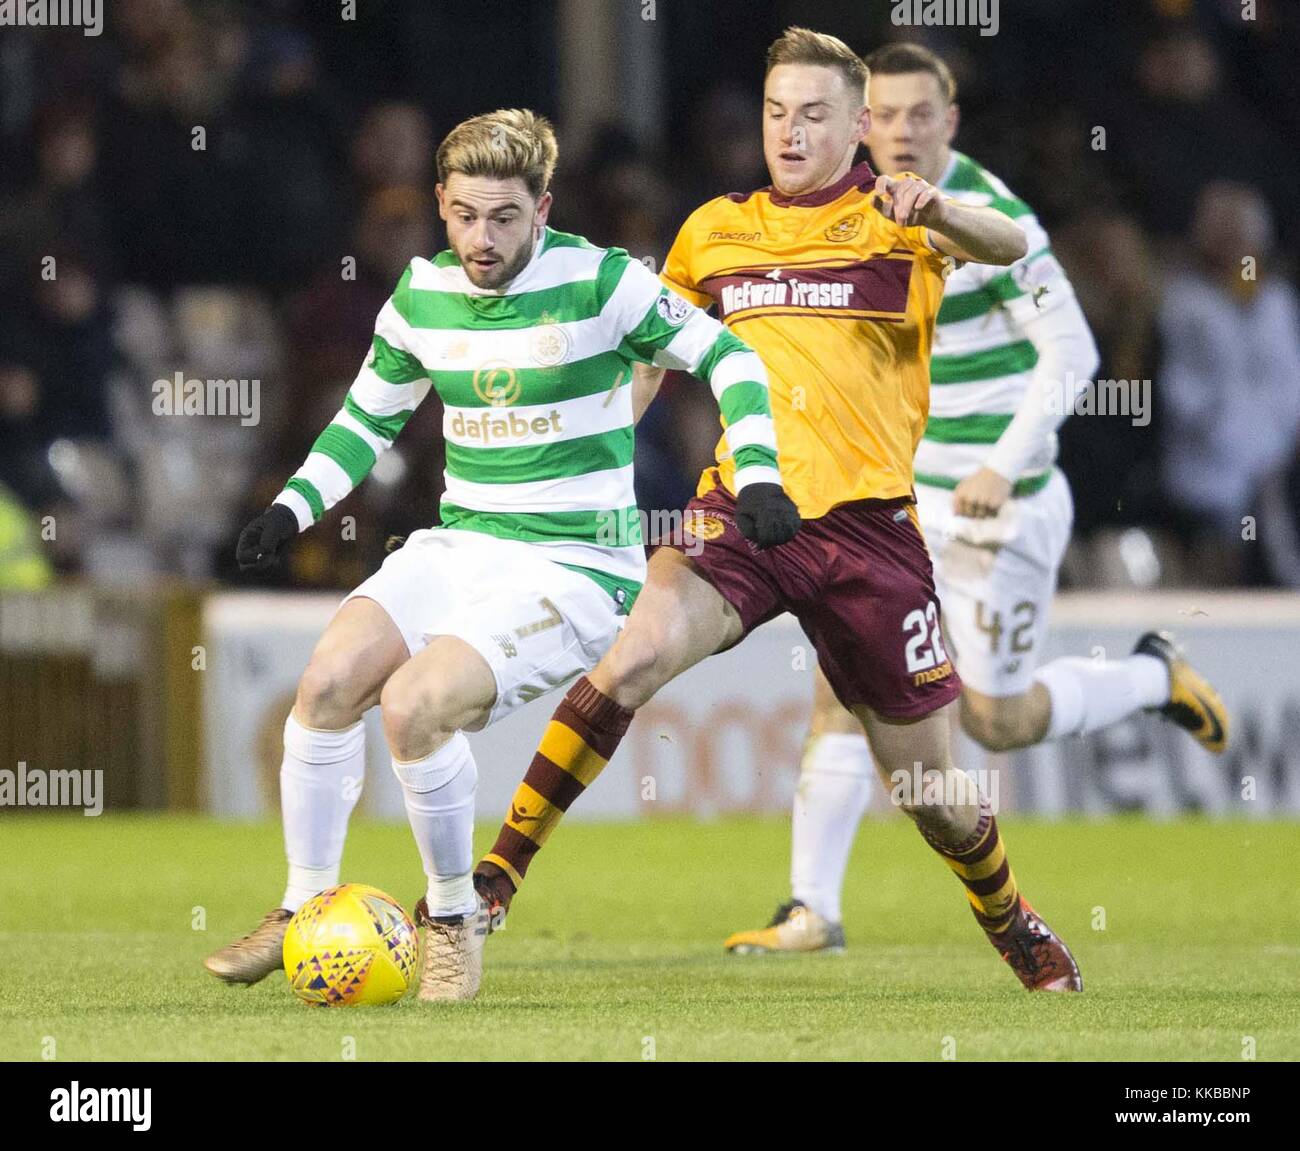 Celtic's Patrick Roberts (left) and Motherwell's Allan Campbell (right) during the Ladbrokes Scottish Premiership match at Fir Park, Motherwell. Stock Photo